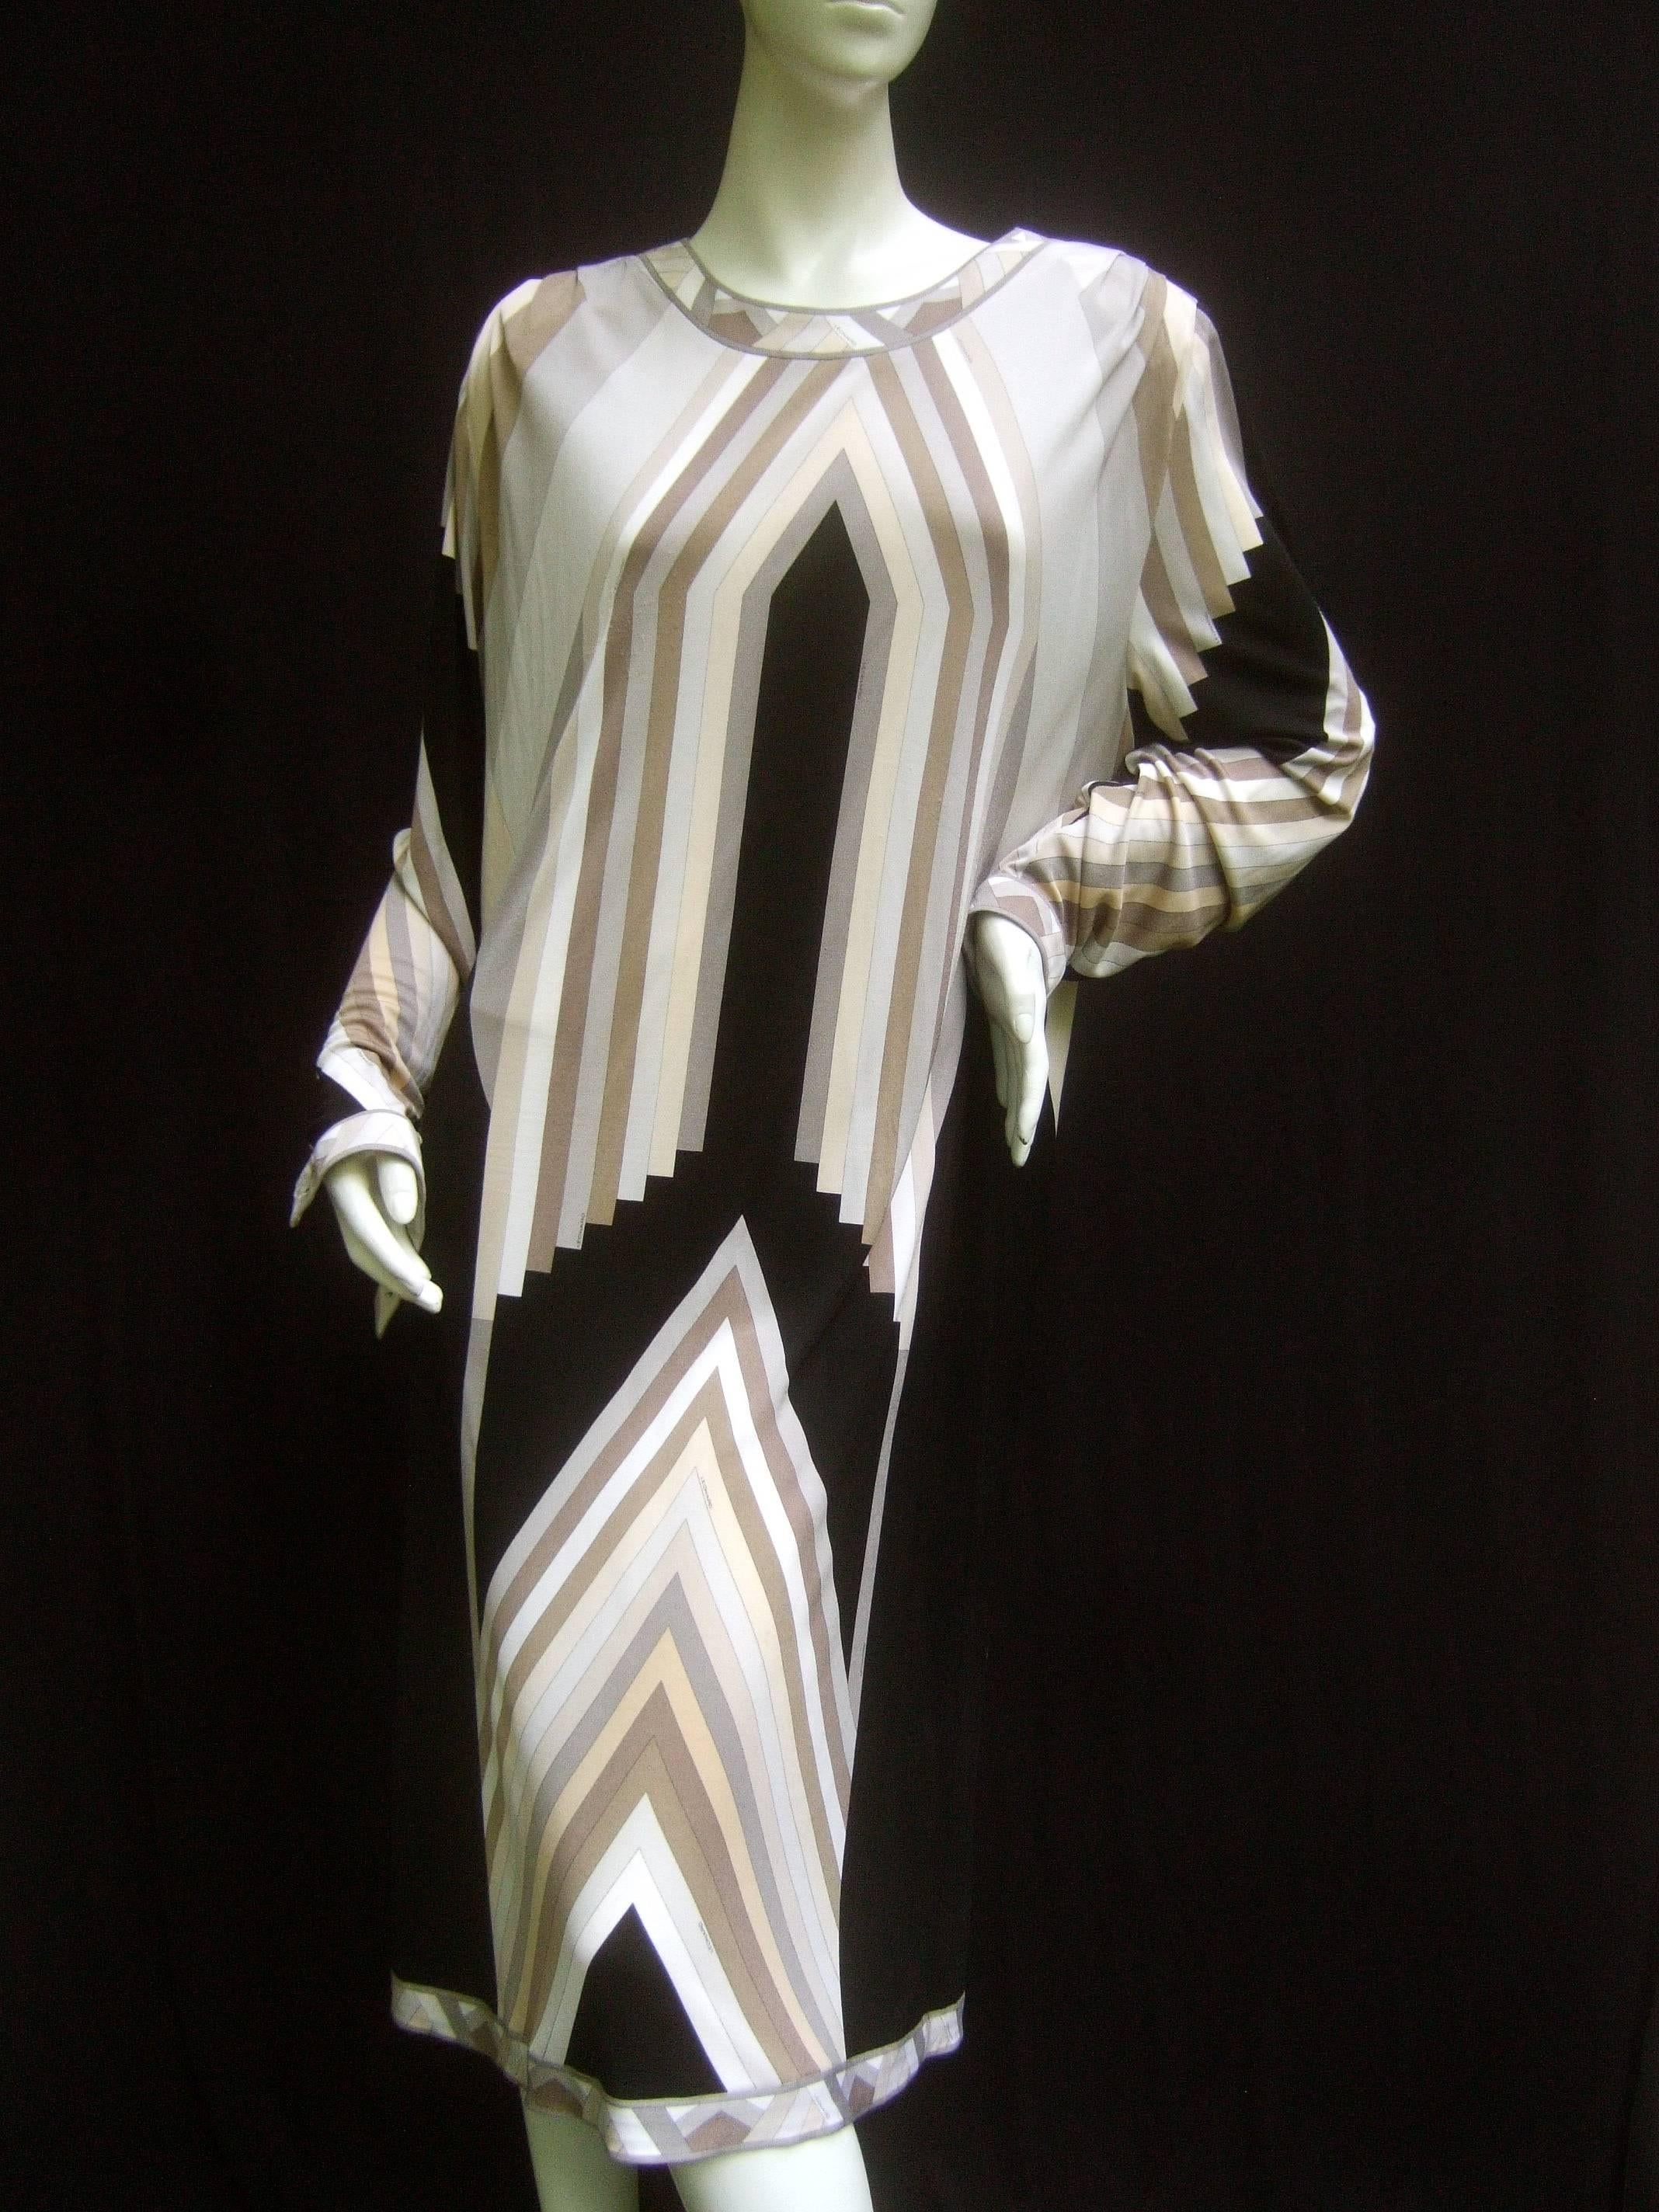 Leonard Paris Silk jersey architectural print dress c 1990   
The elegant dress is illustrated with vertical linear 
bands in subdued hues of ivory, cream, mocha 
browns, light smoky grays illuminated against 
solid black color block silk jersey